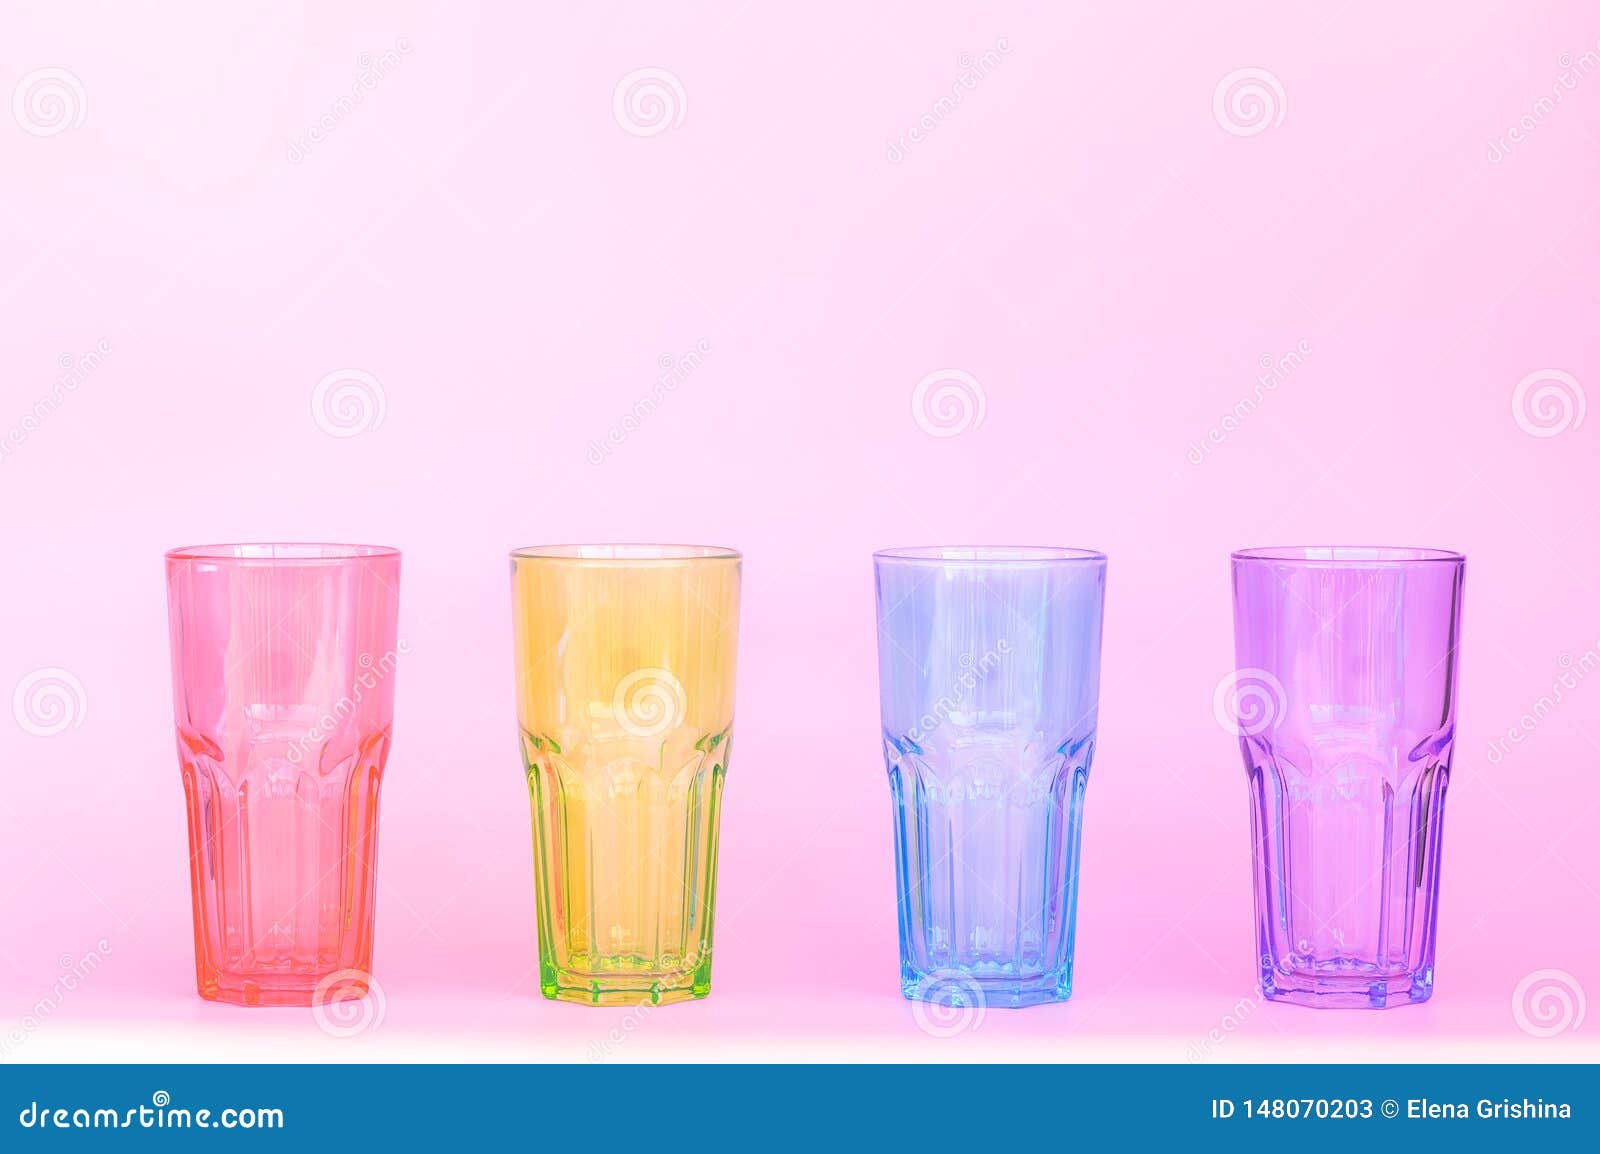 Four Identical Glass Glasses Red Green Blue Purple Stock Image